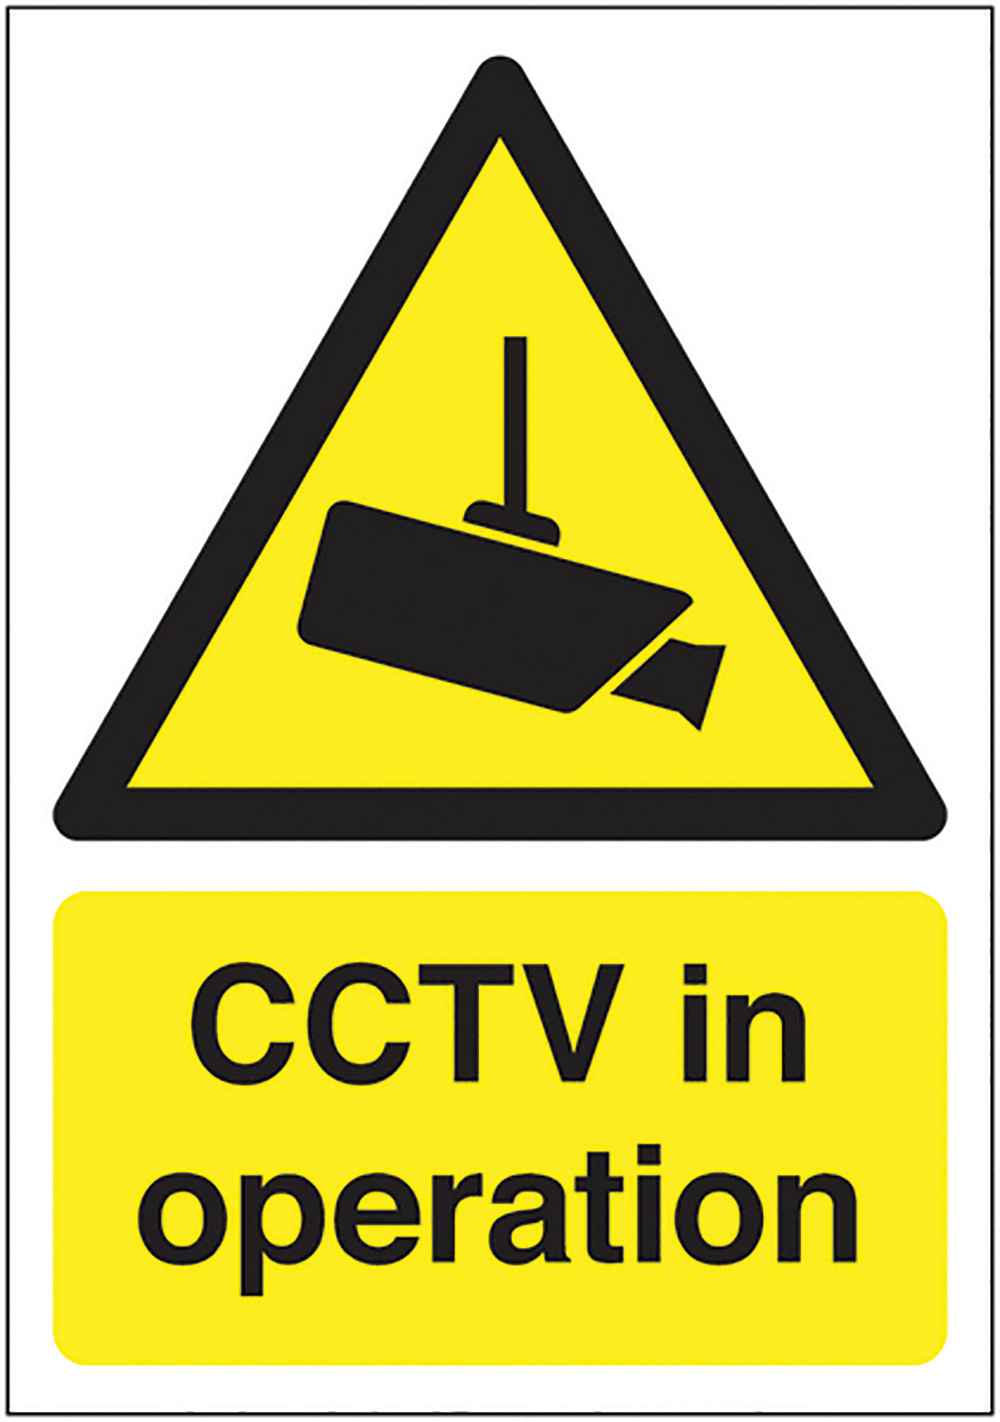 CCTV in operation 400x300mm Reflective Safety Sign